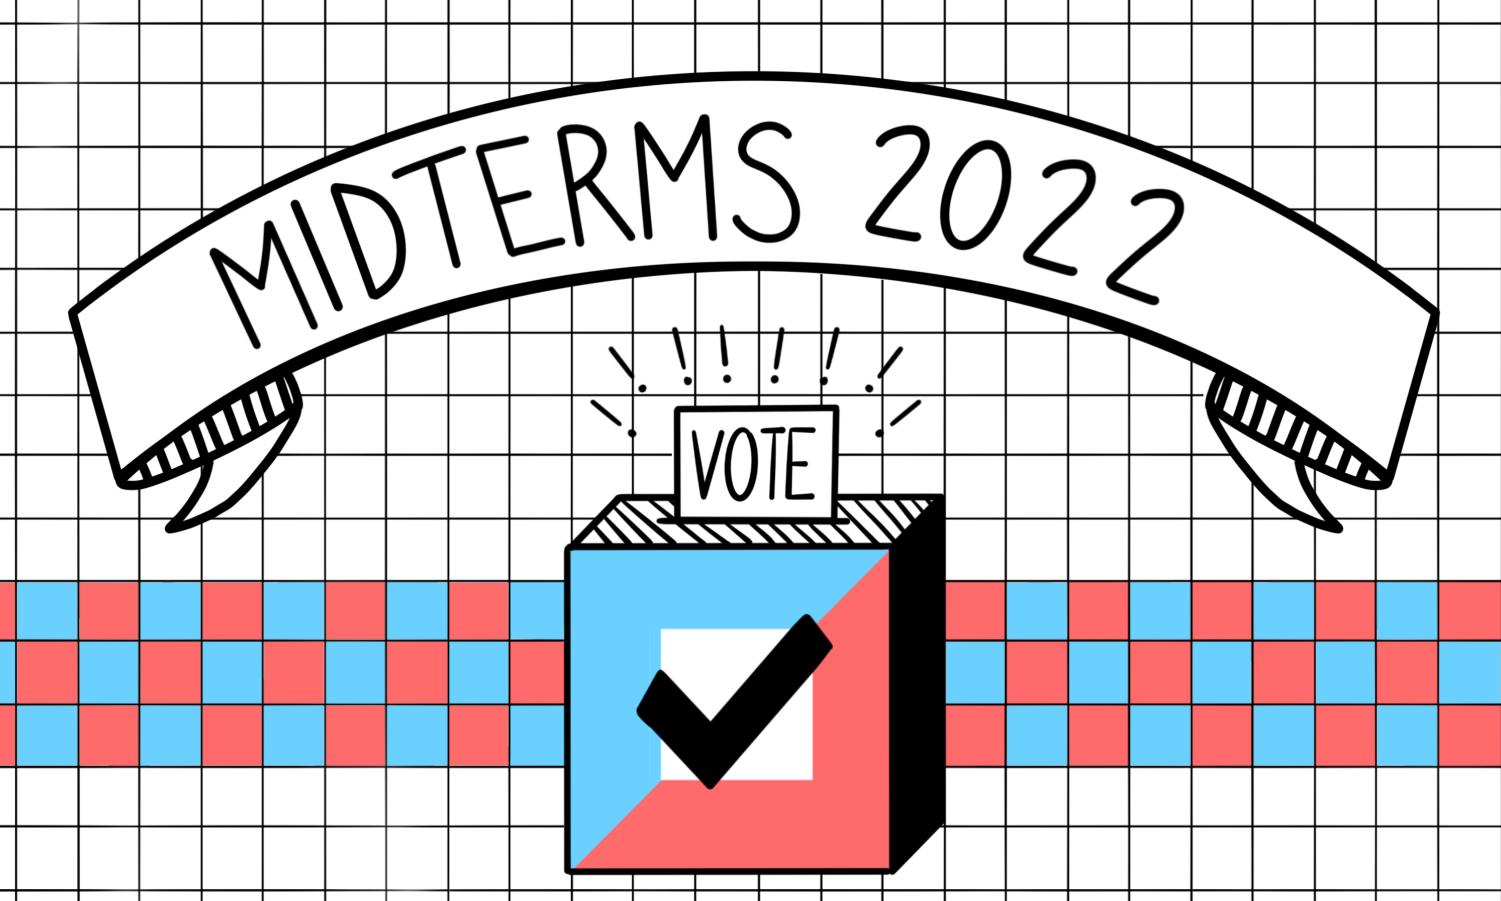 Midterms+2022+banner+over+a+checkered+background+and+a+voting+box